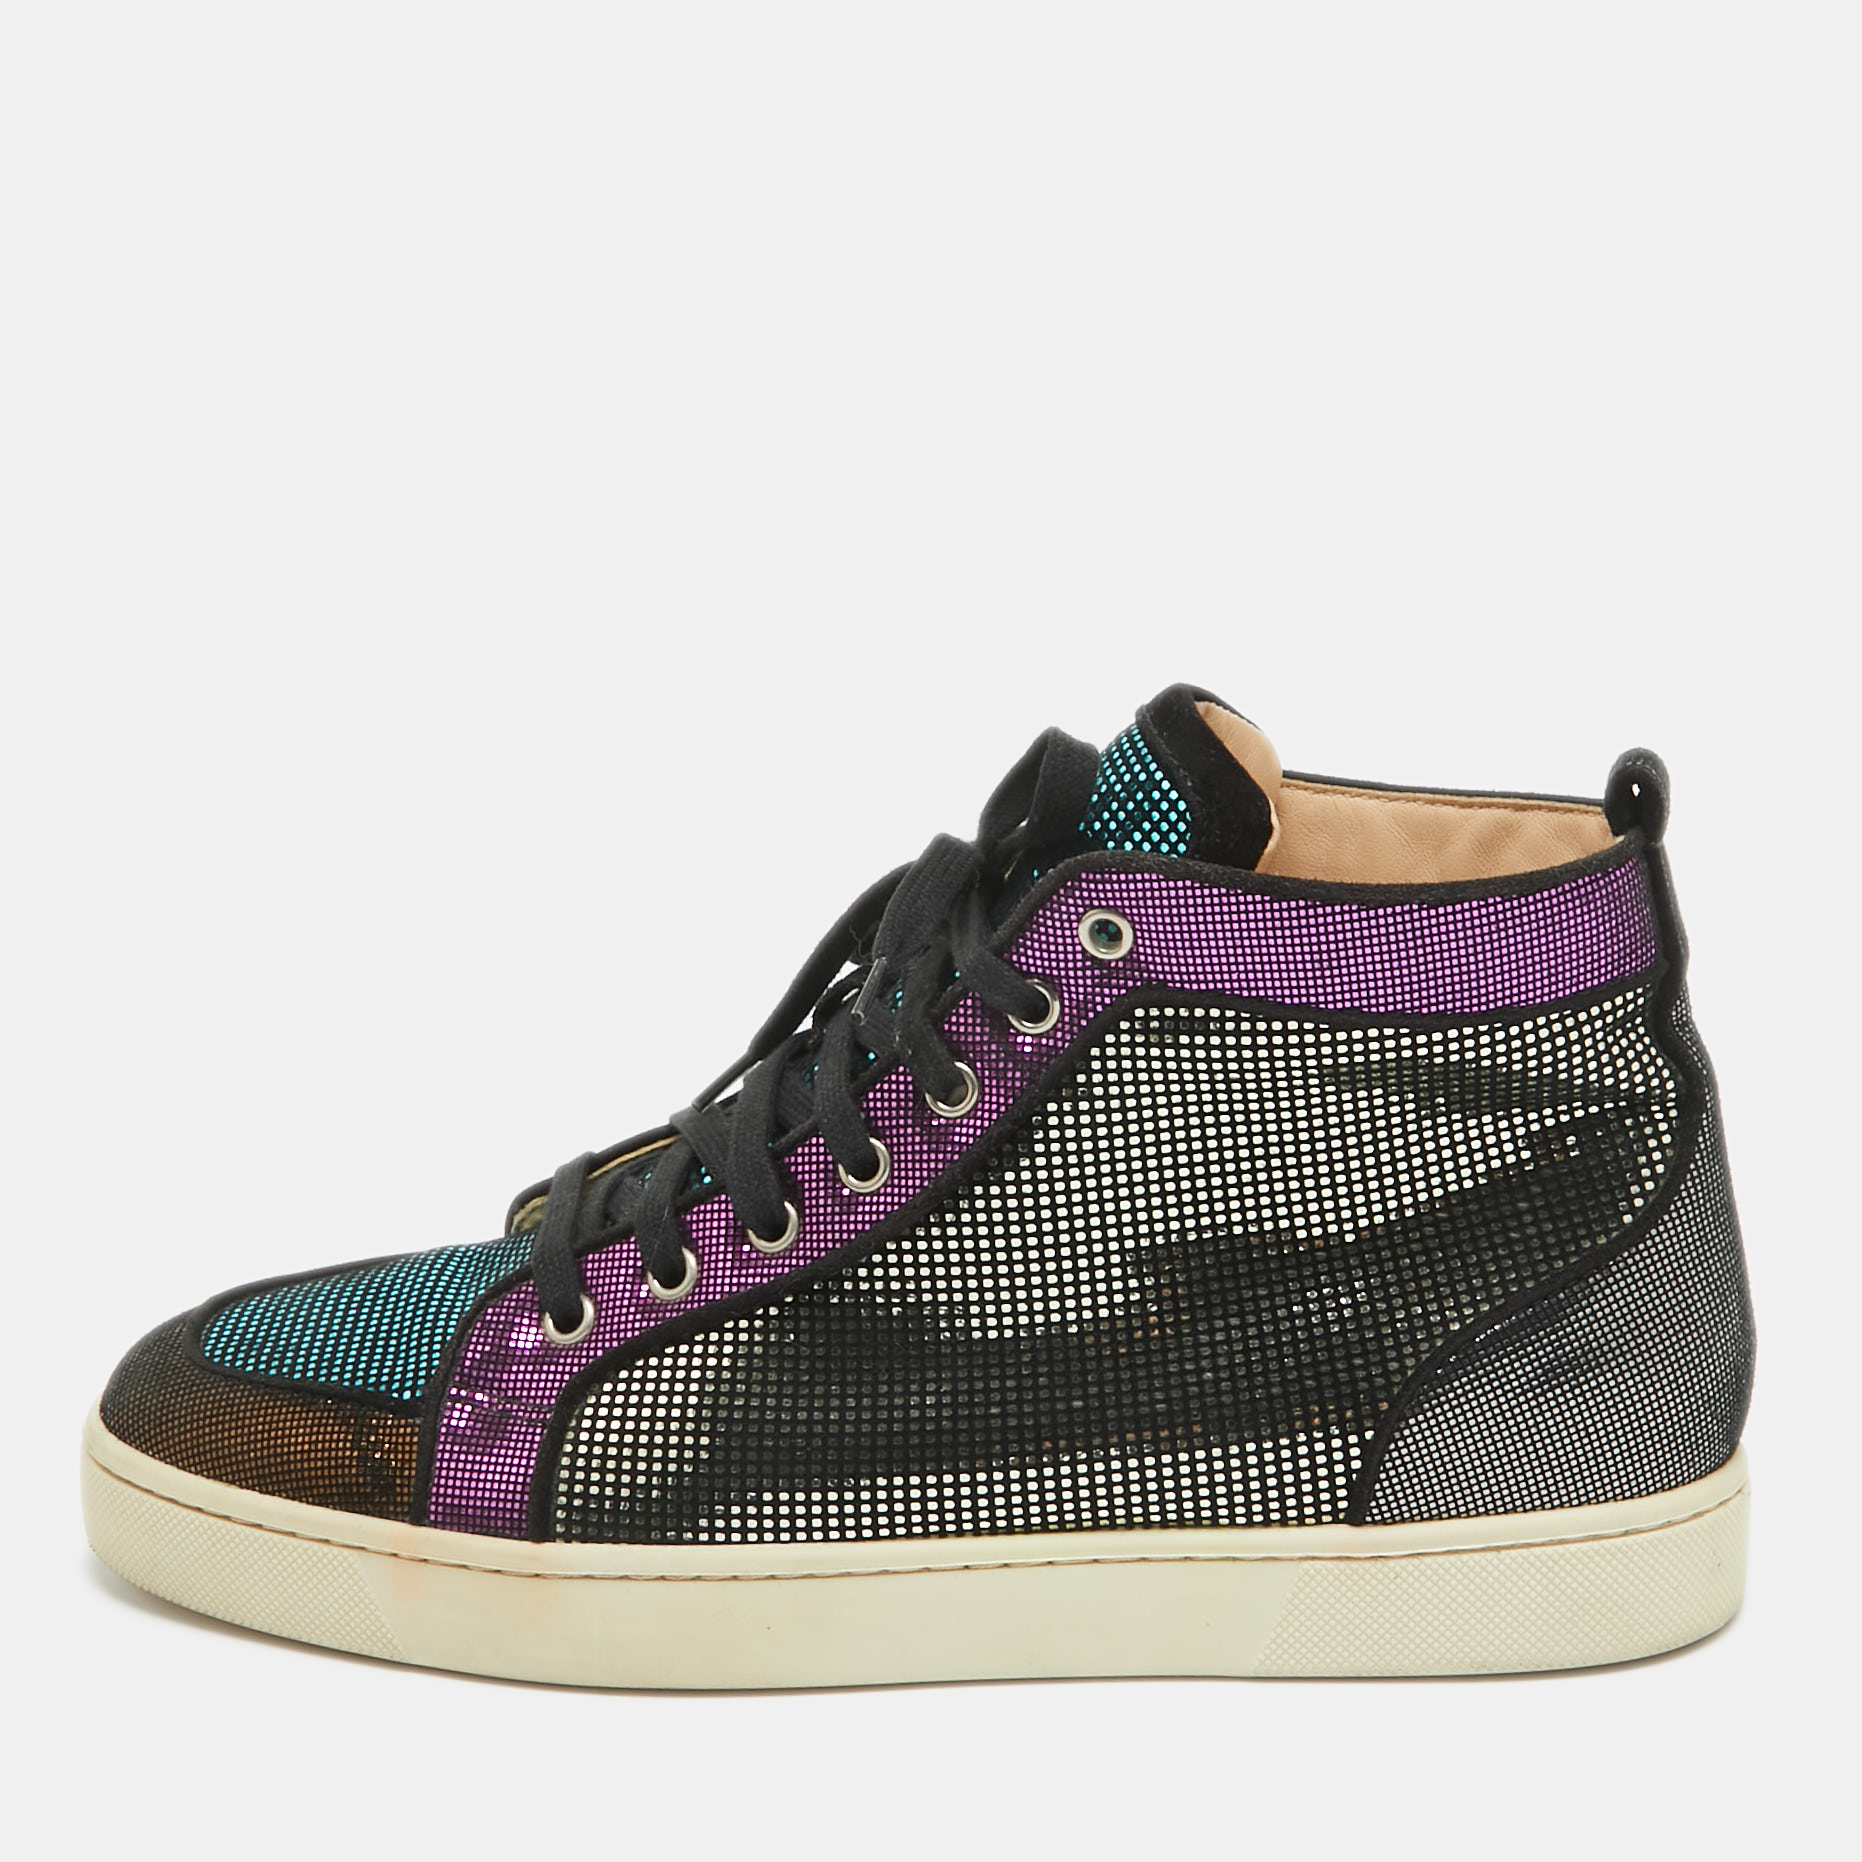 Pre-owned Christian Louboutin Multicolor Suede Colorblock Pattern High Top Sneakers Size 42